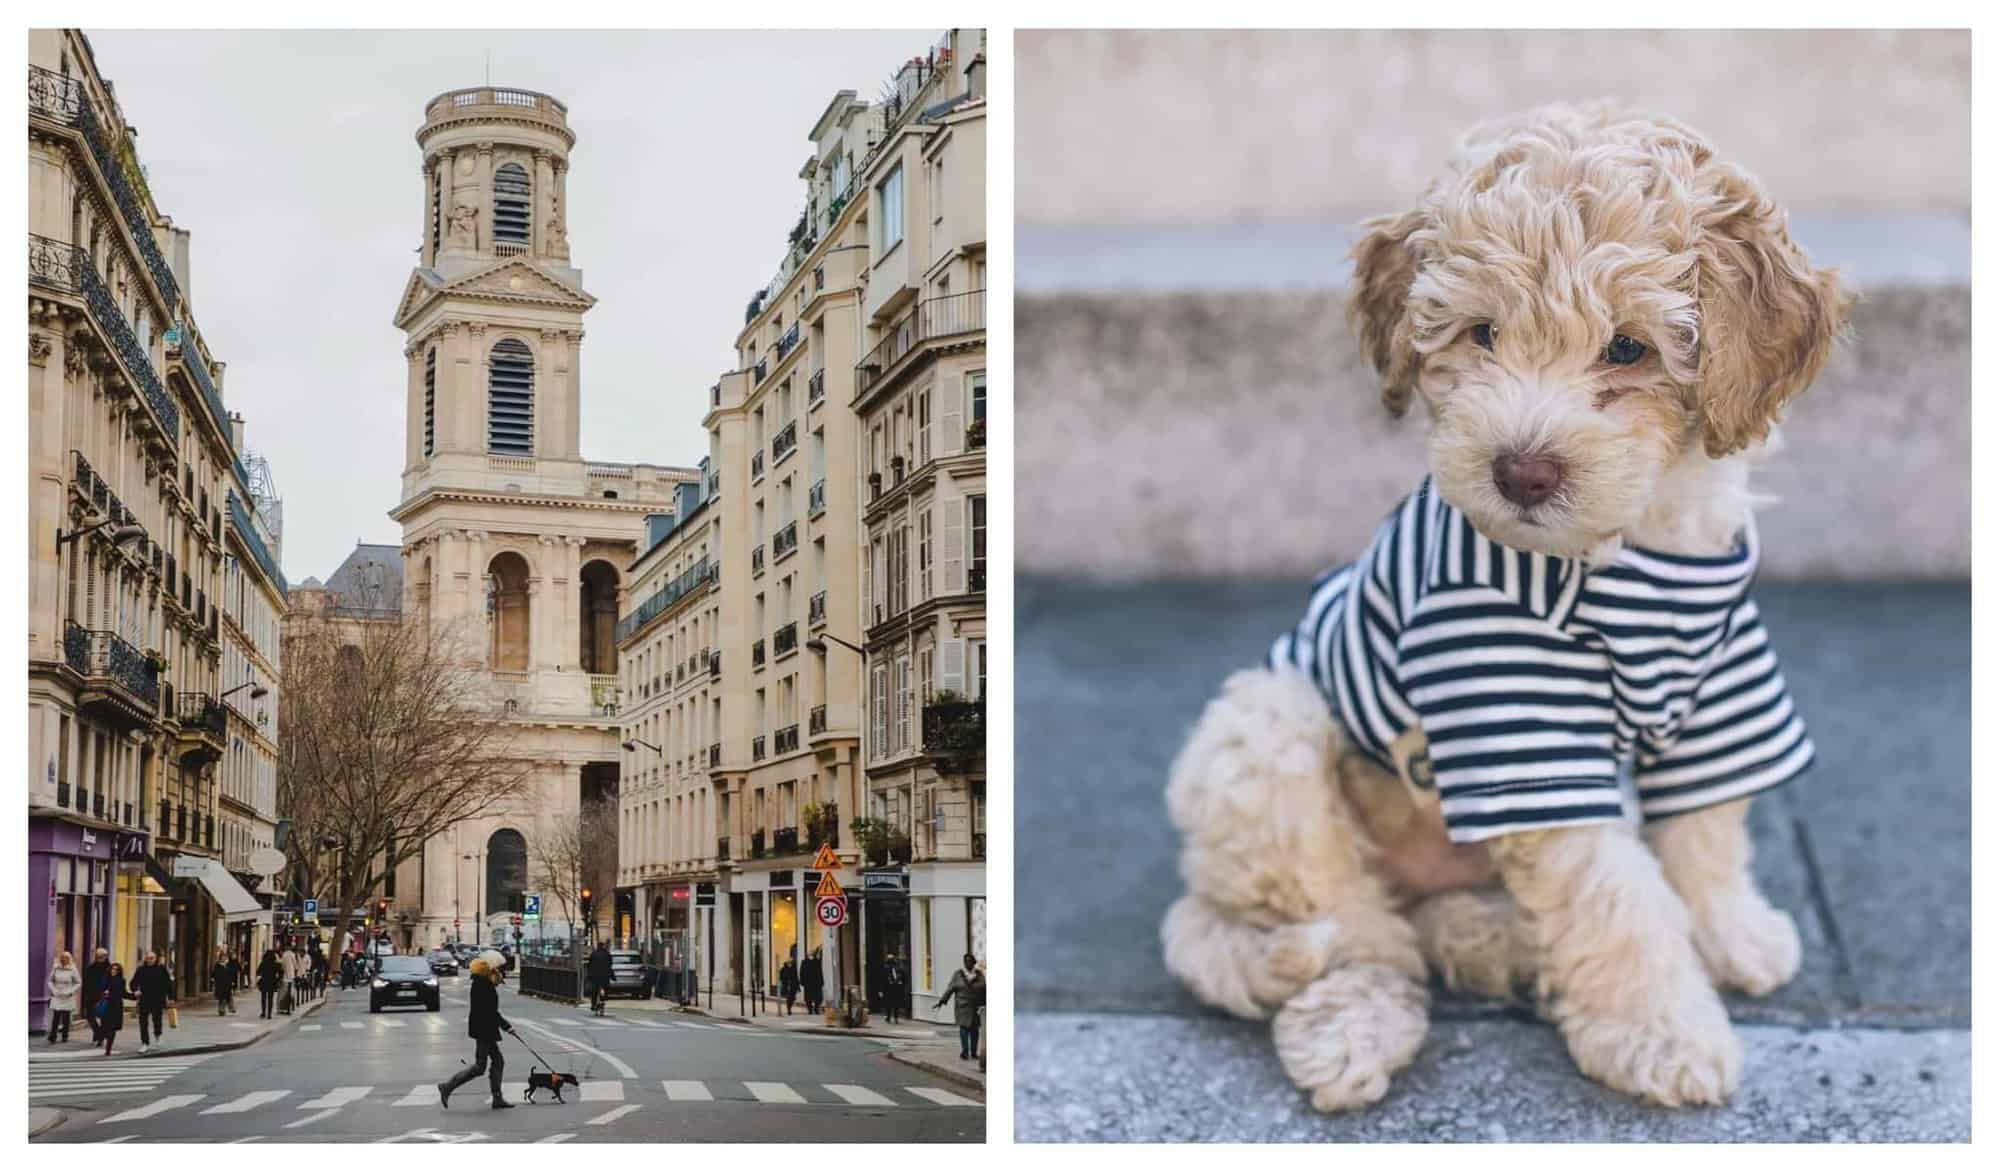 left: a dog walker crosses a Parisian street; right: a an adorable cockapoo dressed in a striped t-shirt.